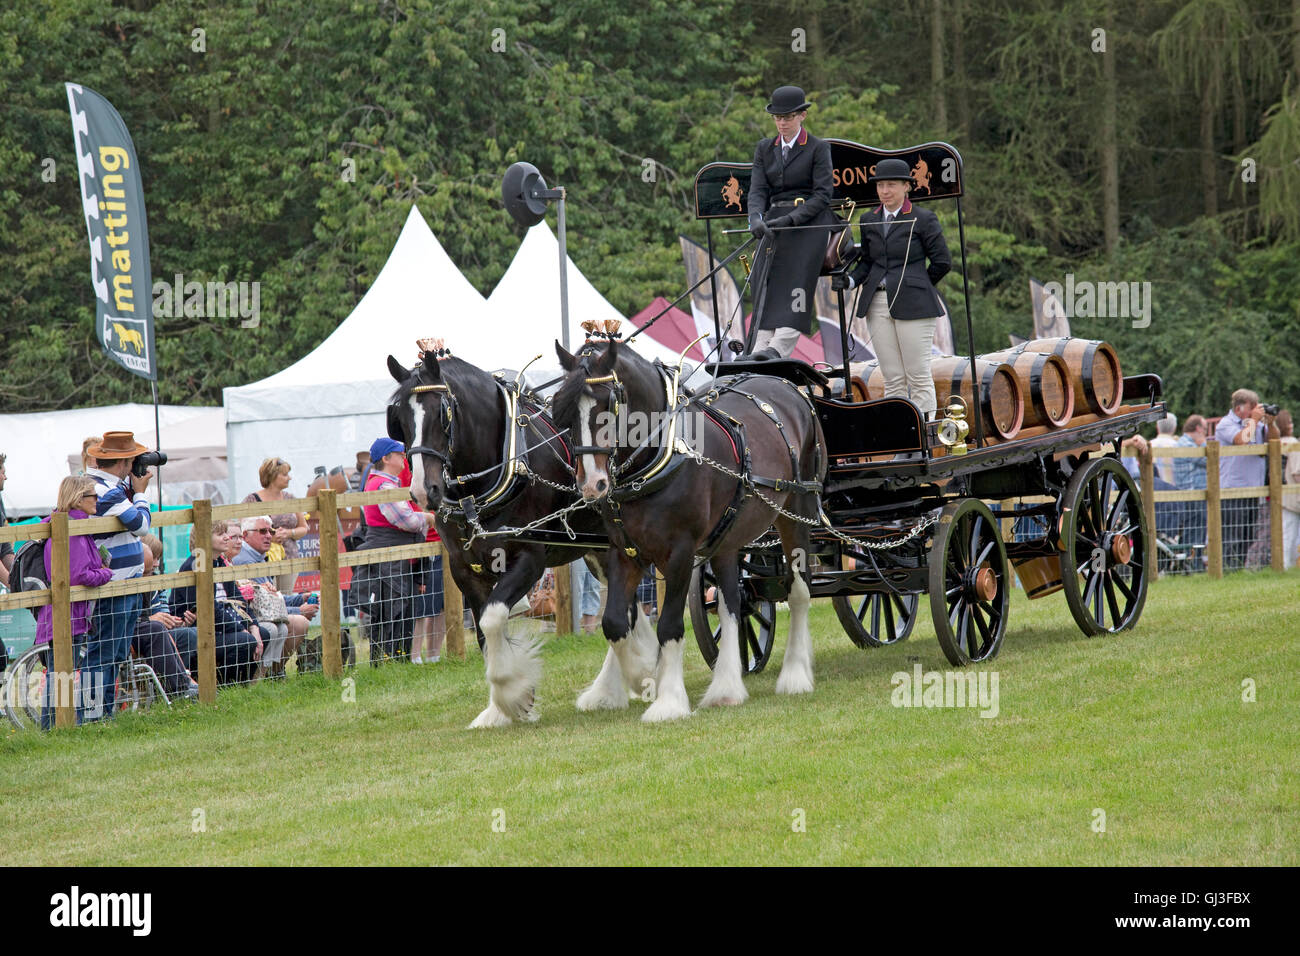 Robinsons Brewery Shire horses at Countryfile Live 2016 Blenheim Palace Woodstock UK Stock Photo